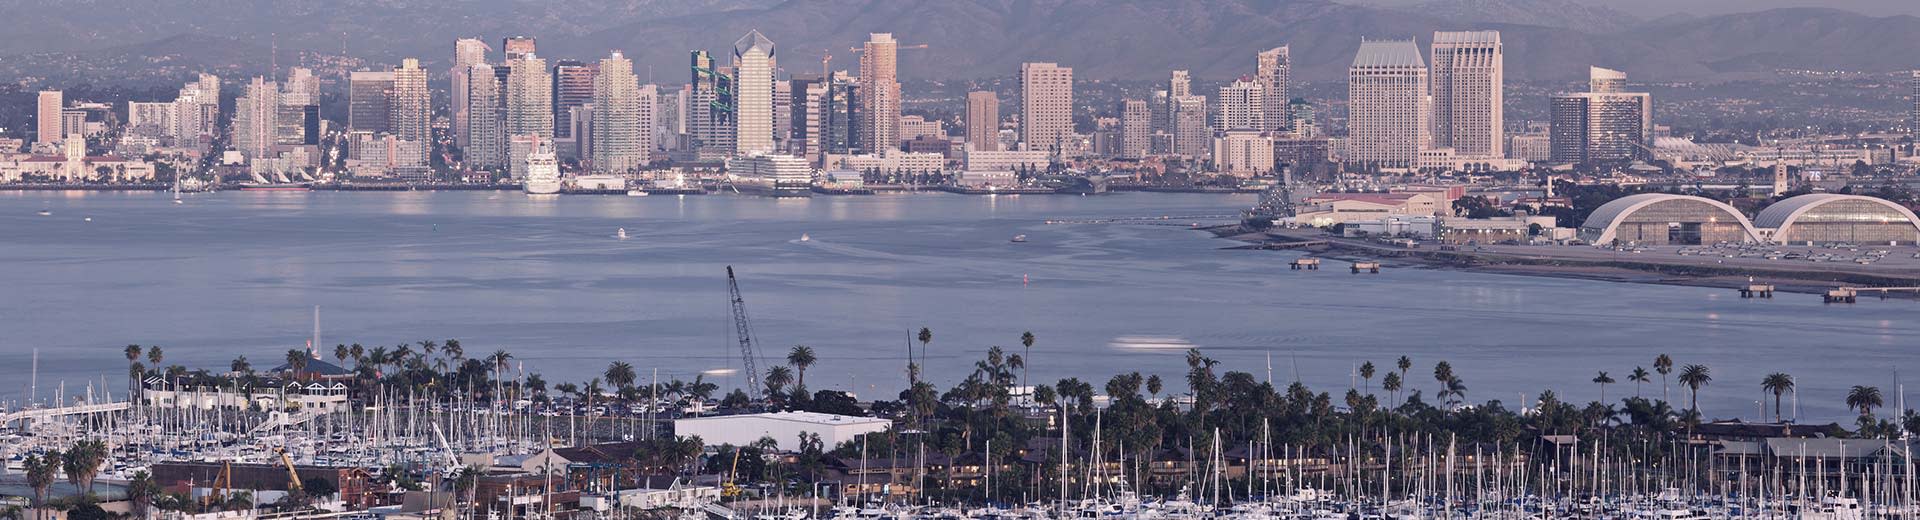 Palm trees dominate the foreground, while across a body of water lie the white, tall buildings of San Diego in the heat.